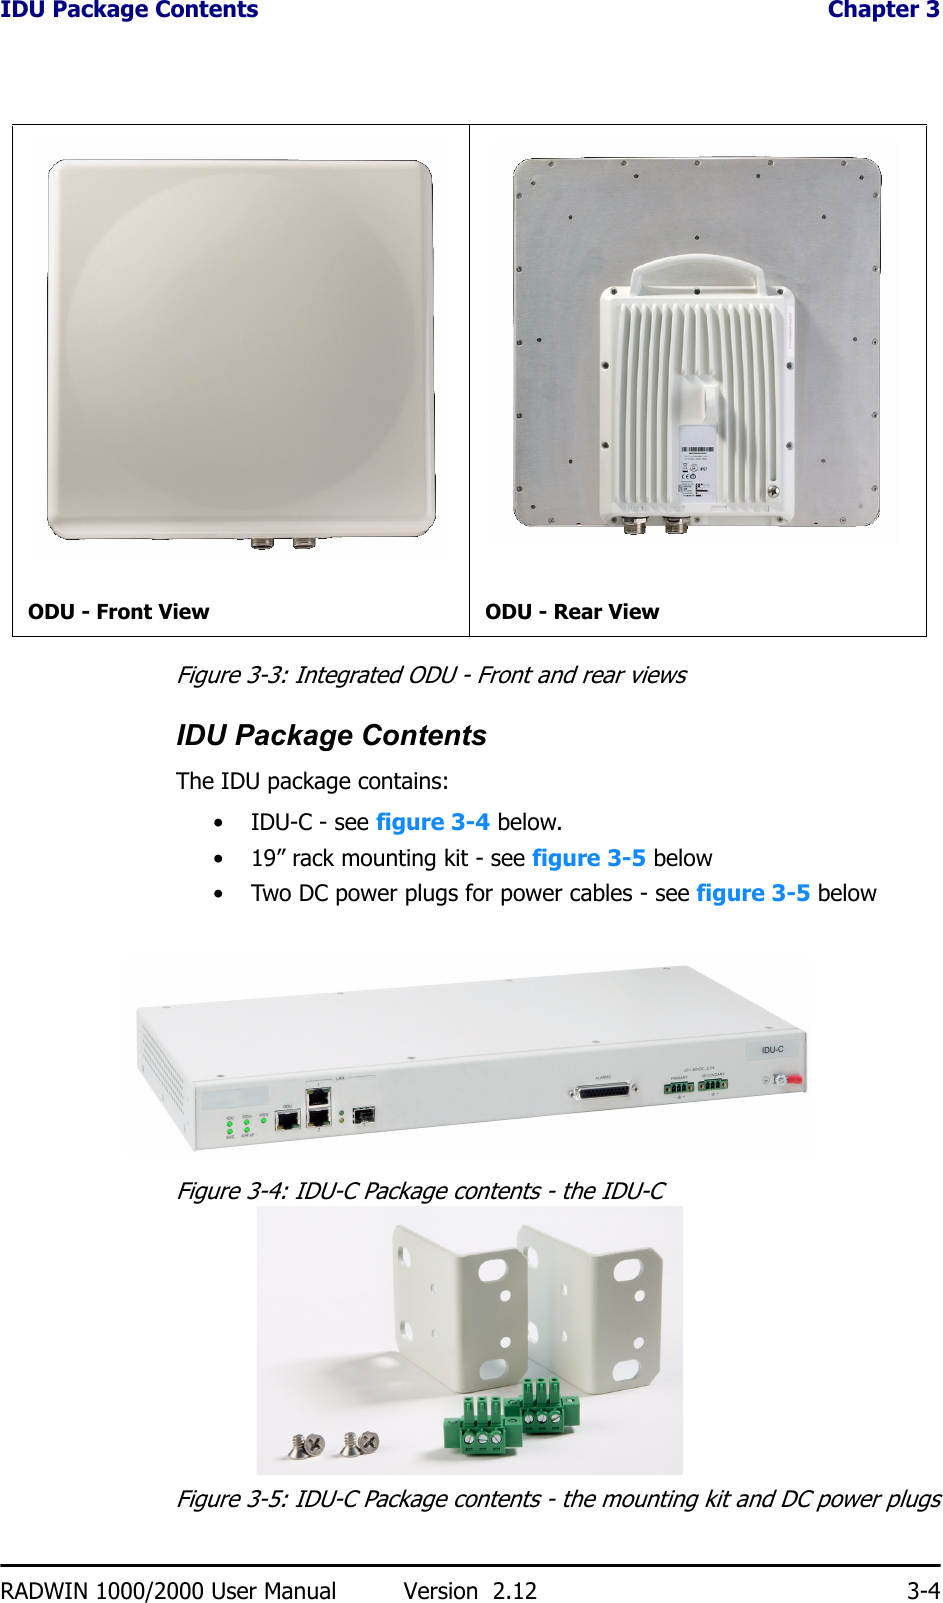 IDU Package Contents  Chapter 3RADWIN 1000/2000 User Manual Version  2.12 3-4Figure 3-3: Integrated ODU - Front and rear viewsIDU Package ContentsThe IDU package contains:• IDU-C - see figure 3-4 below.• 19” rack mounting kit - see figure 3-5 below• Two DC power plugs for power cables - see figure 3-5 belowFigure 3-4: IDU-C Package contents - the IDU-CFigure 3-5: IDU-C Package contents - the mounting kit and DC power plugsODU - Front View ODU - Rear View